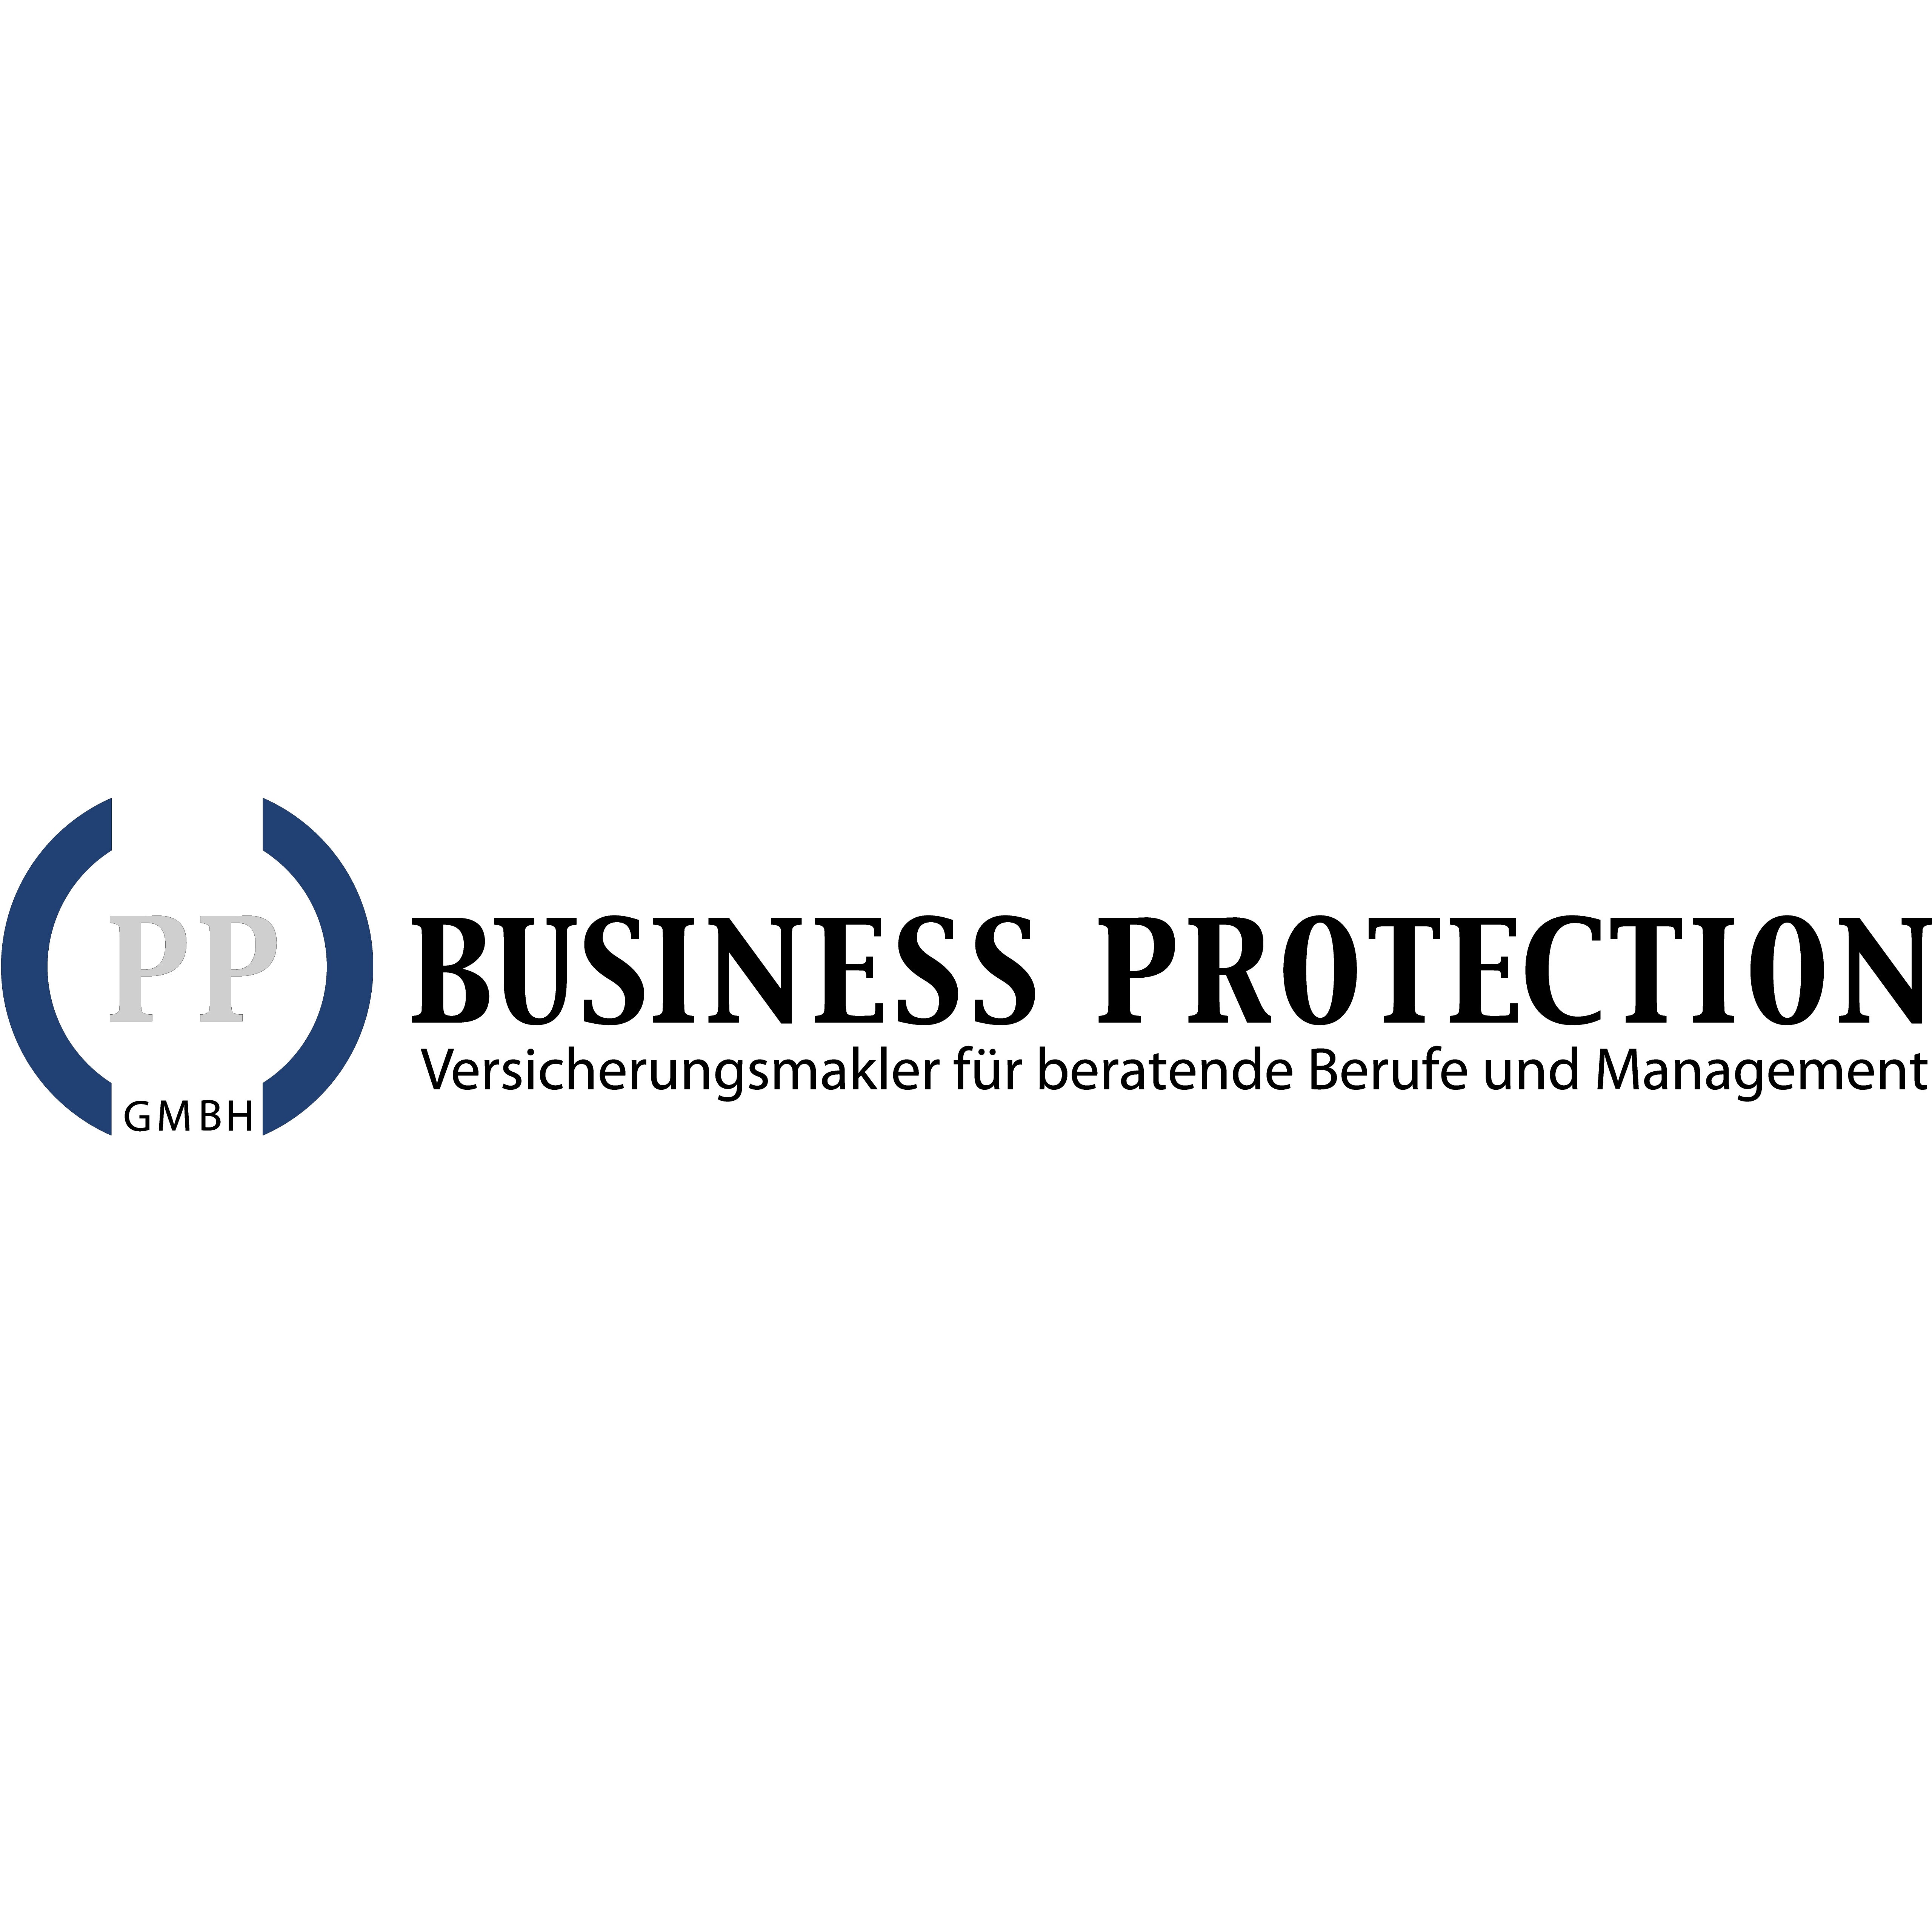 PP Business Protection GmbH in Hamburg